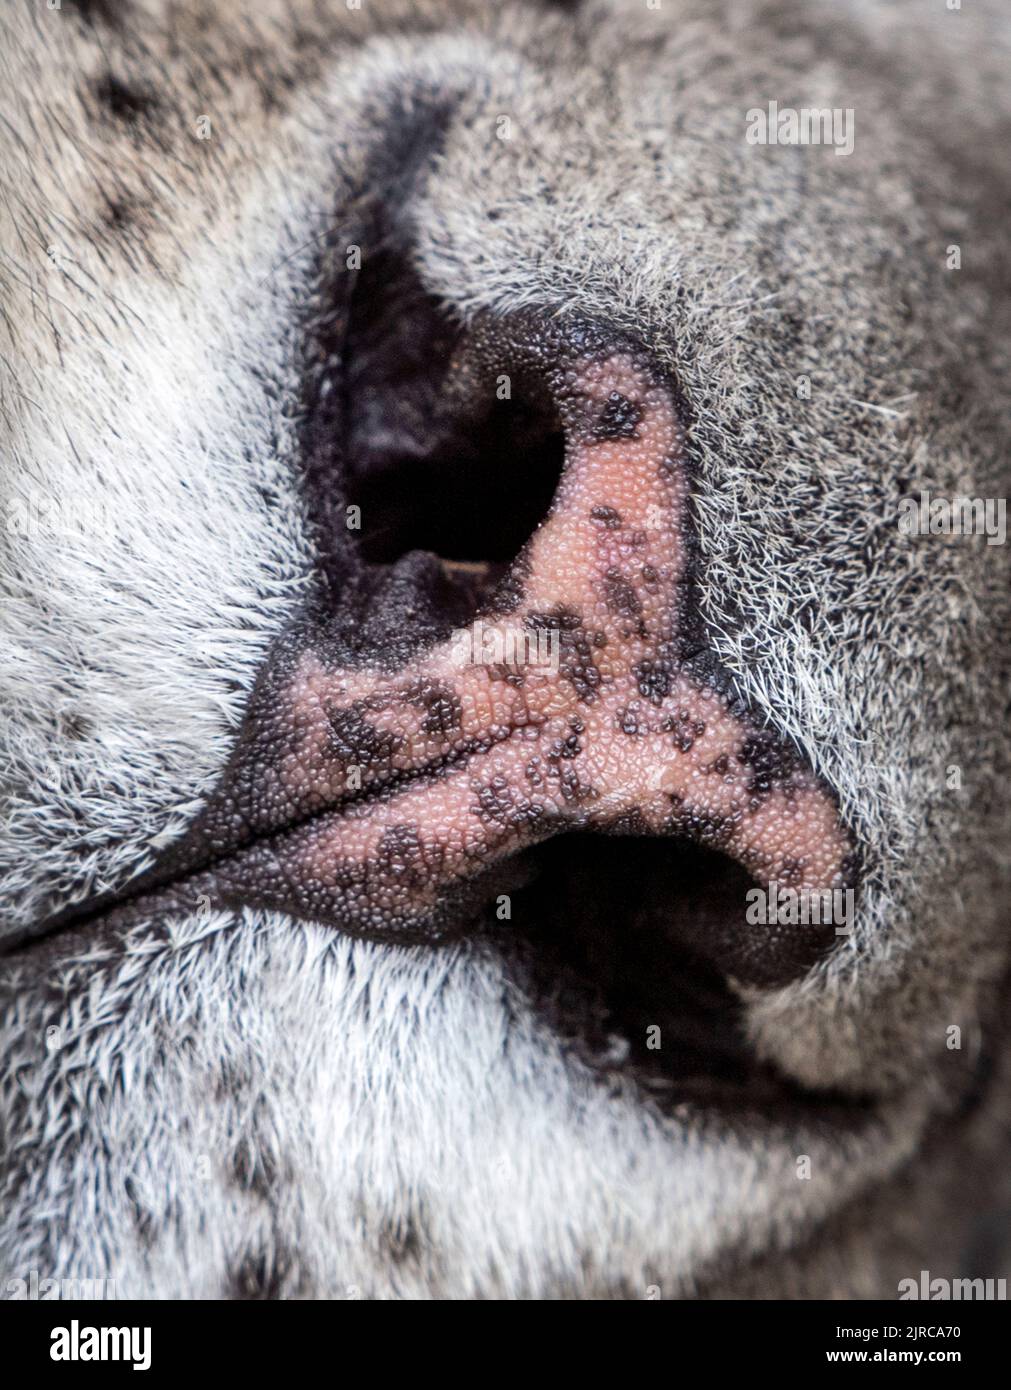 Nostril of adult female snow leopard (extreme close-up) Stock Photo